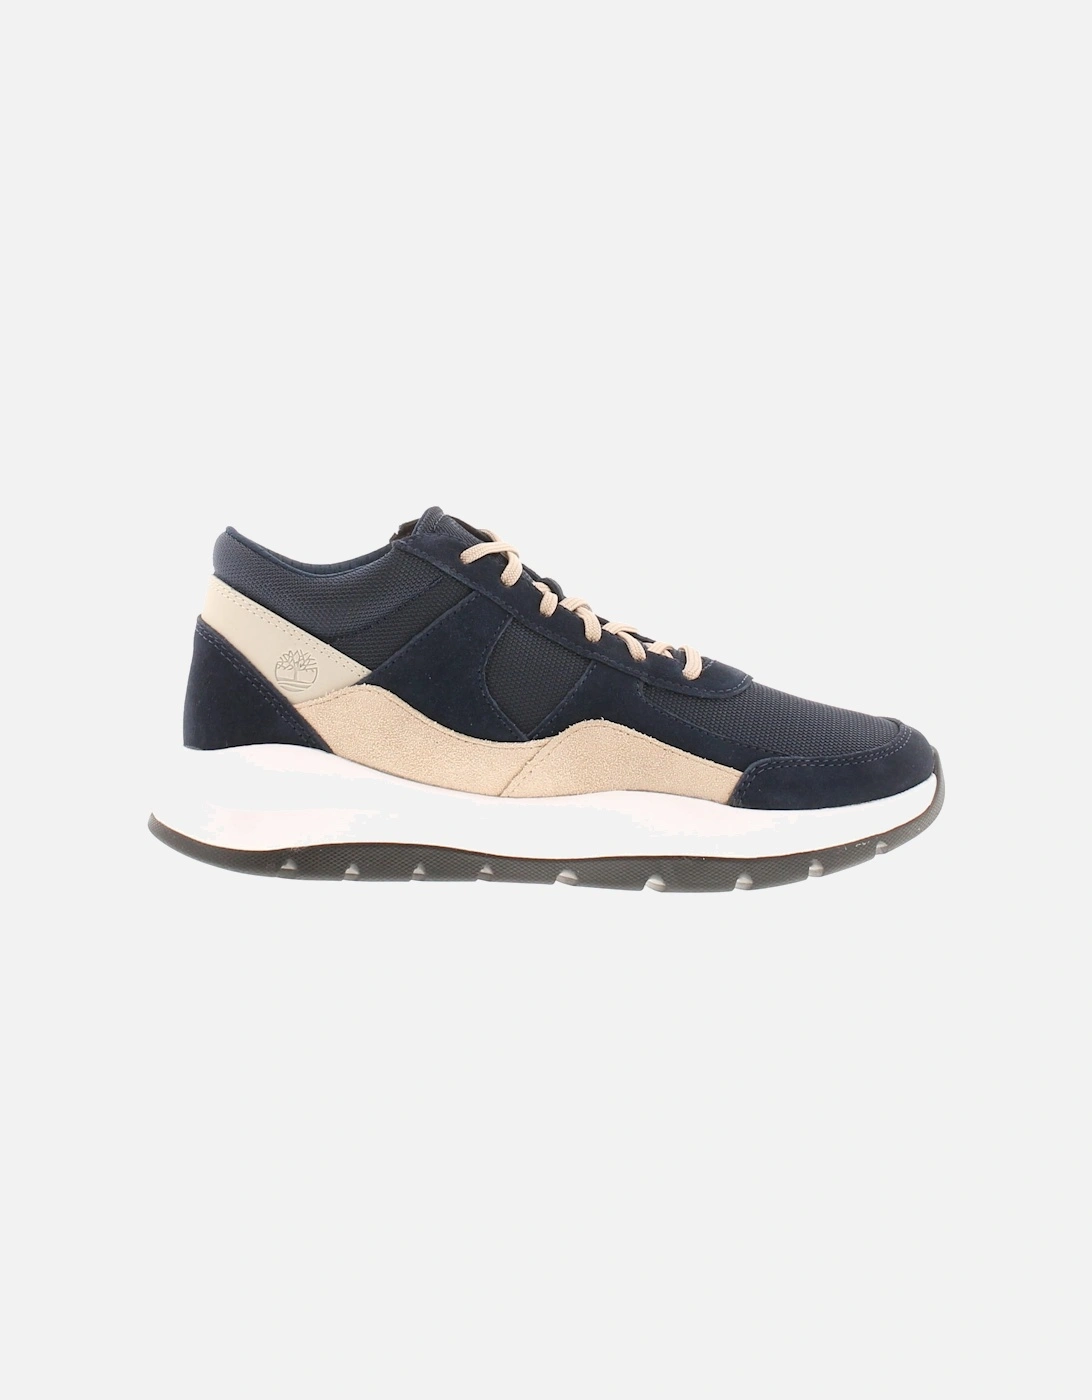 Mens Trainers Boroughs fl Super ox Lace Up navy UK Size